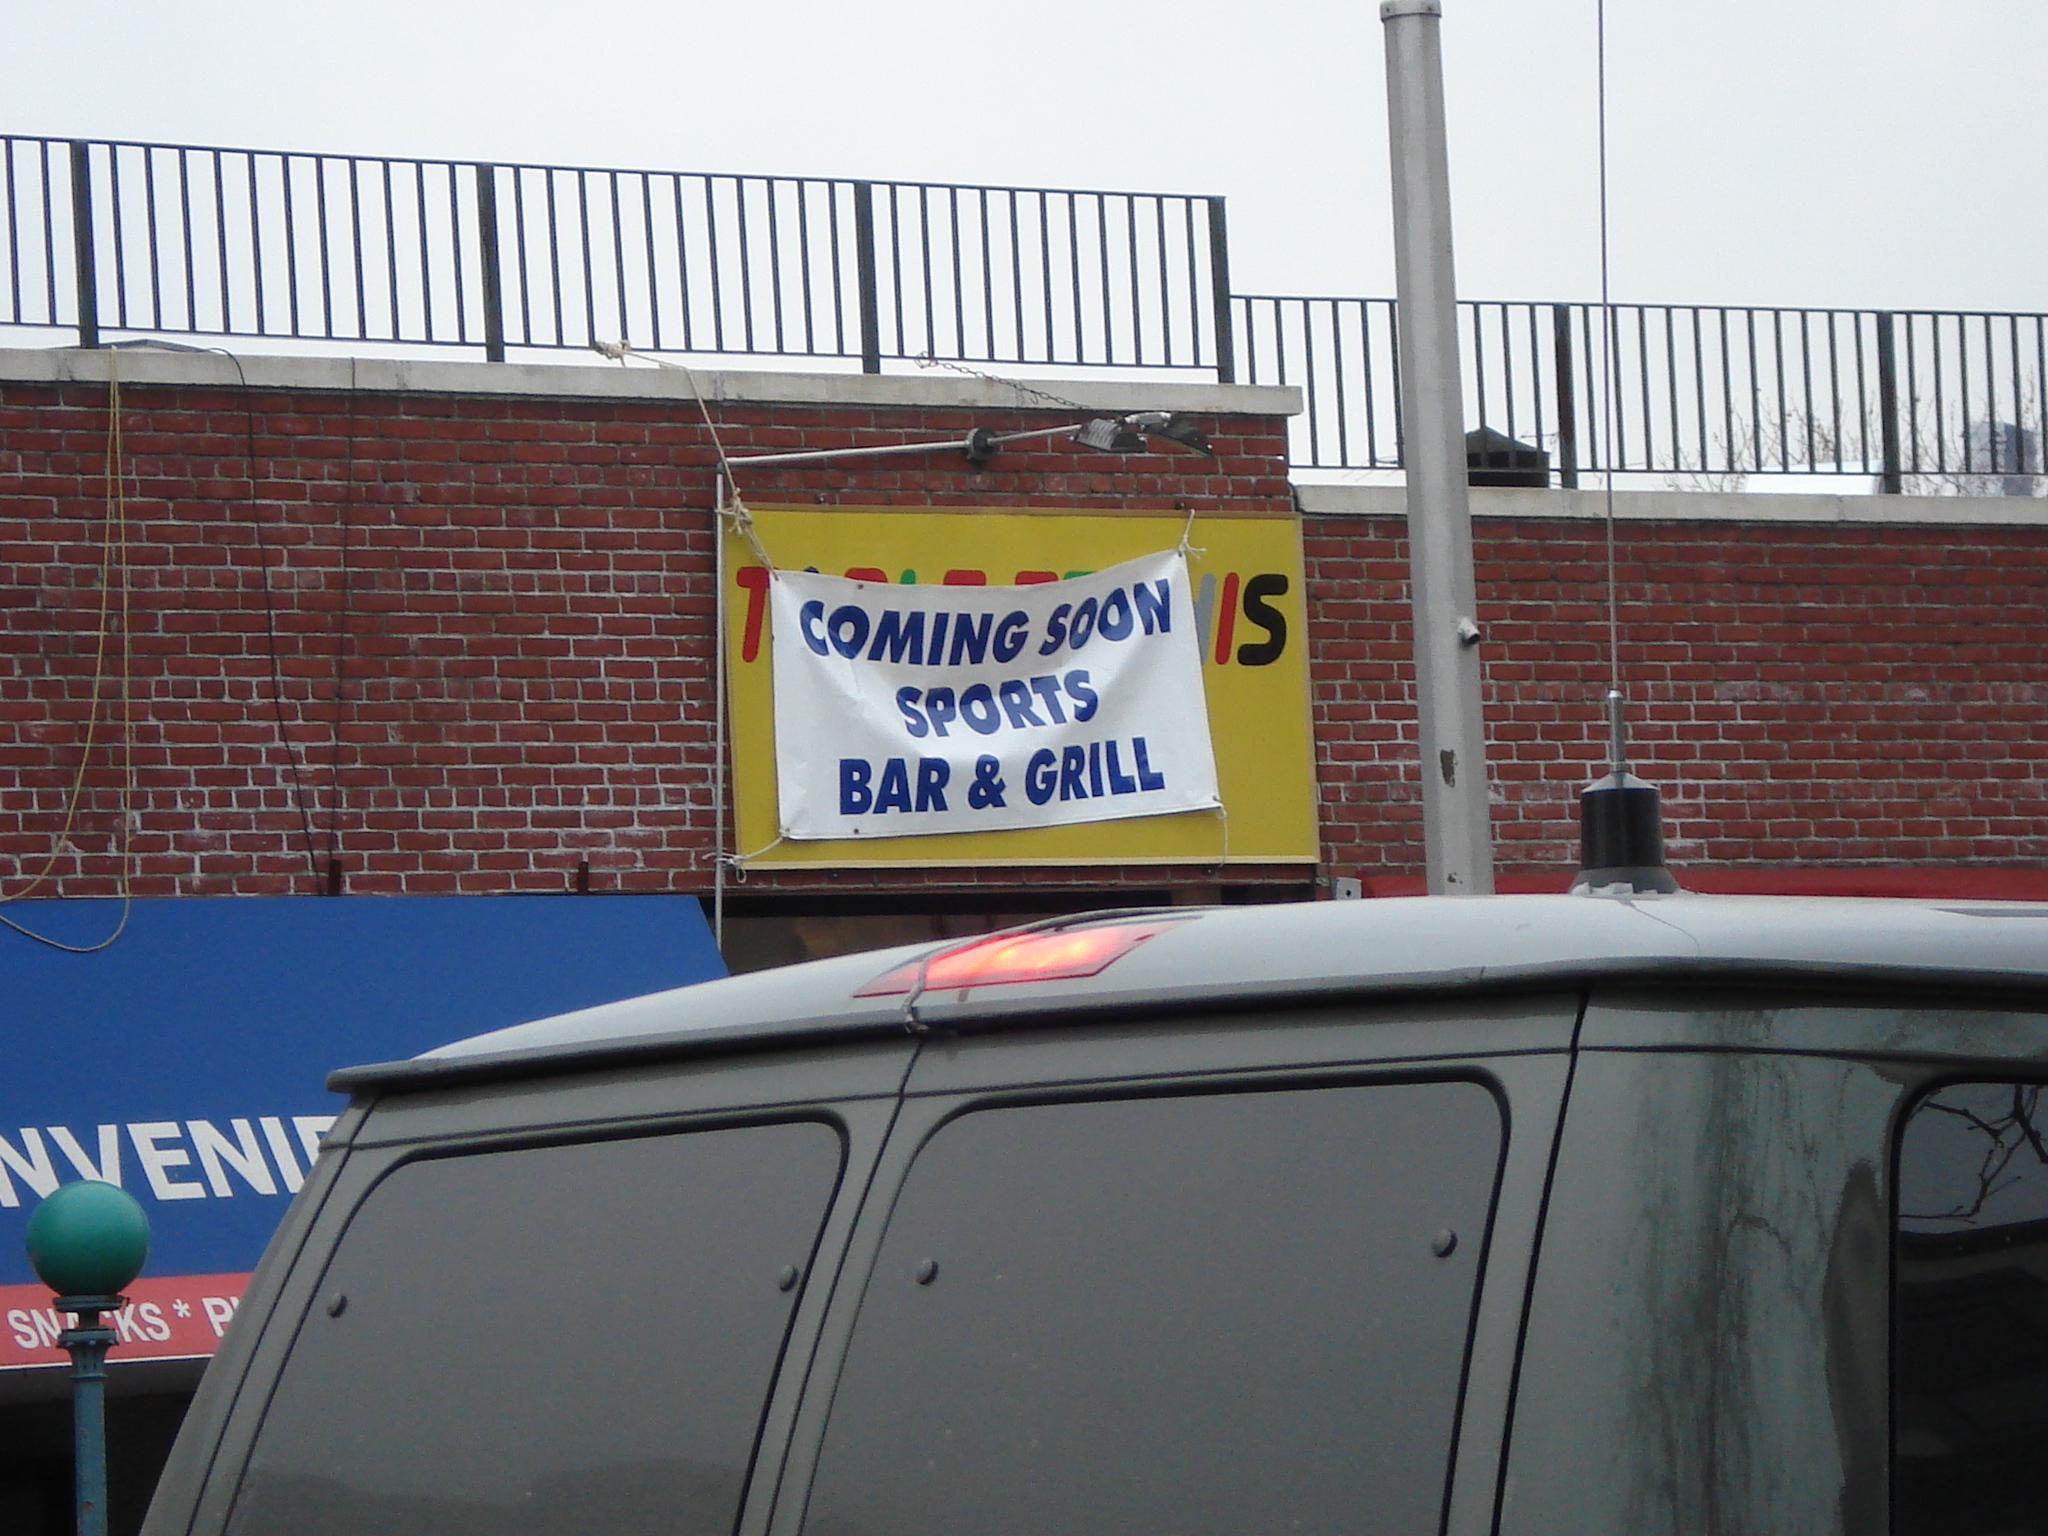 a sign advertising a bar and grill is on the side of the building